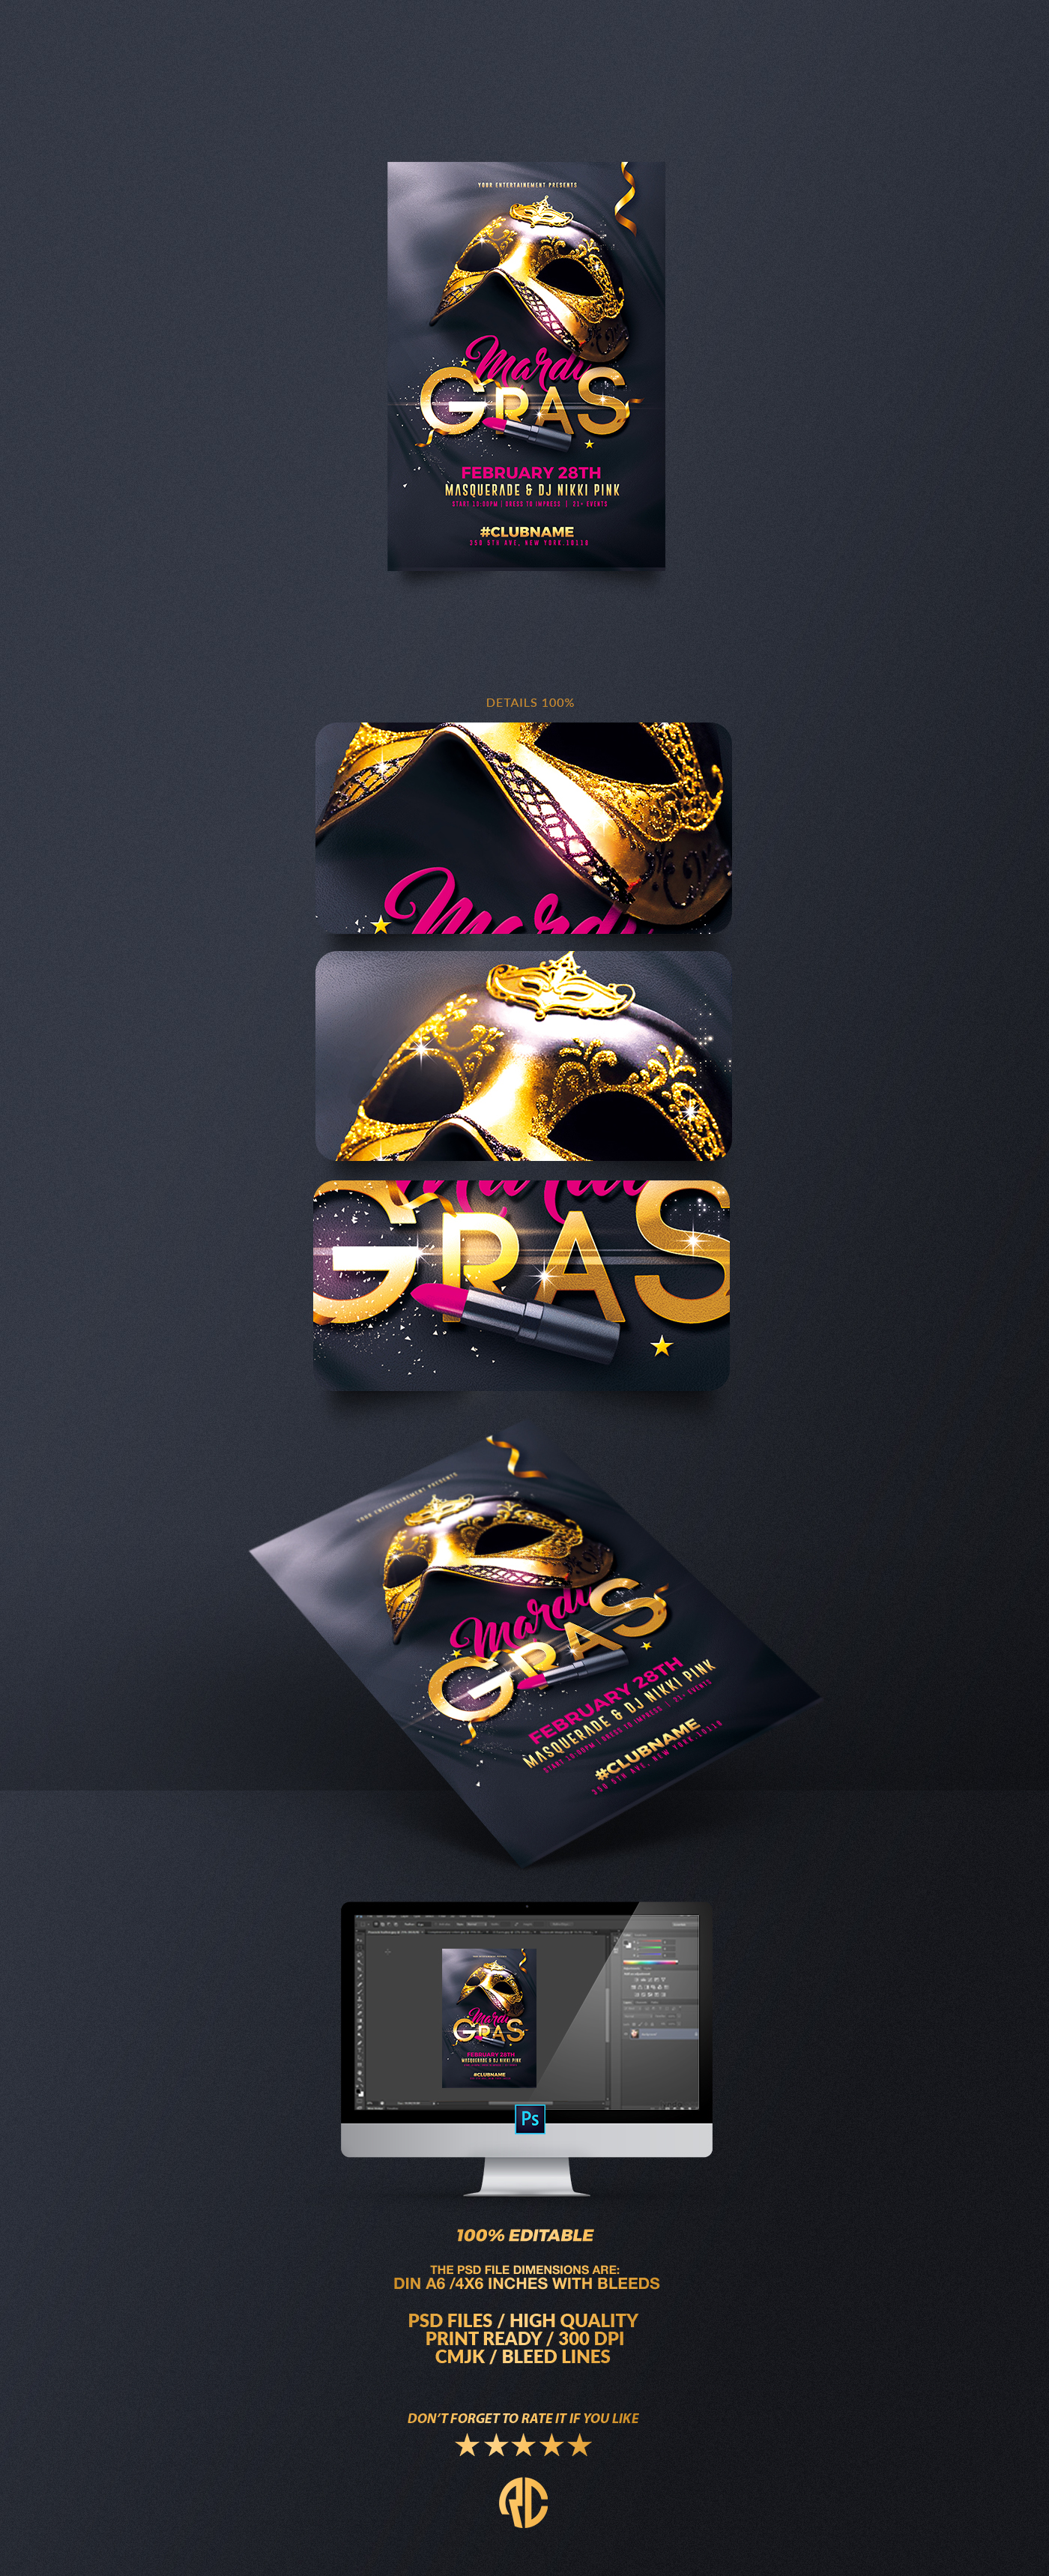 mardi gras Carnival carnival party mardis gras party flyer template postcards Invitation gold mask Flyer Party